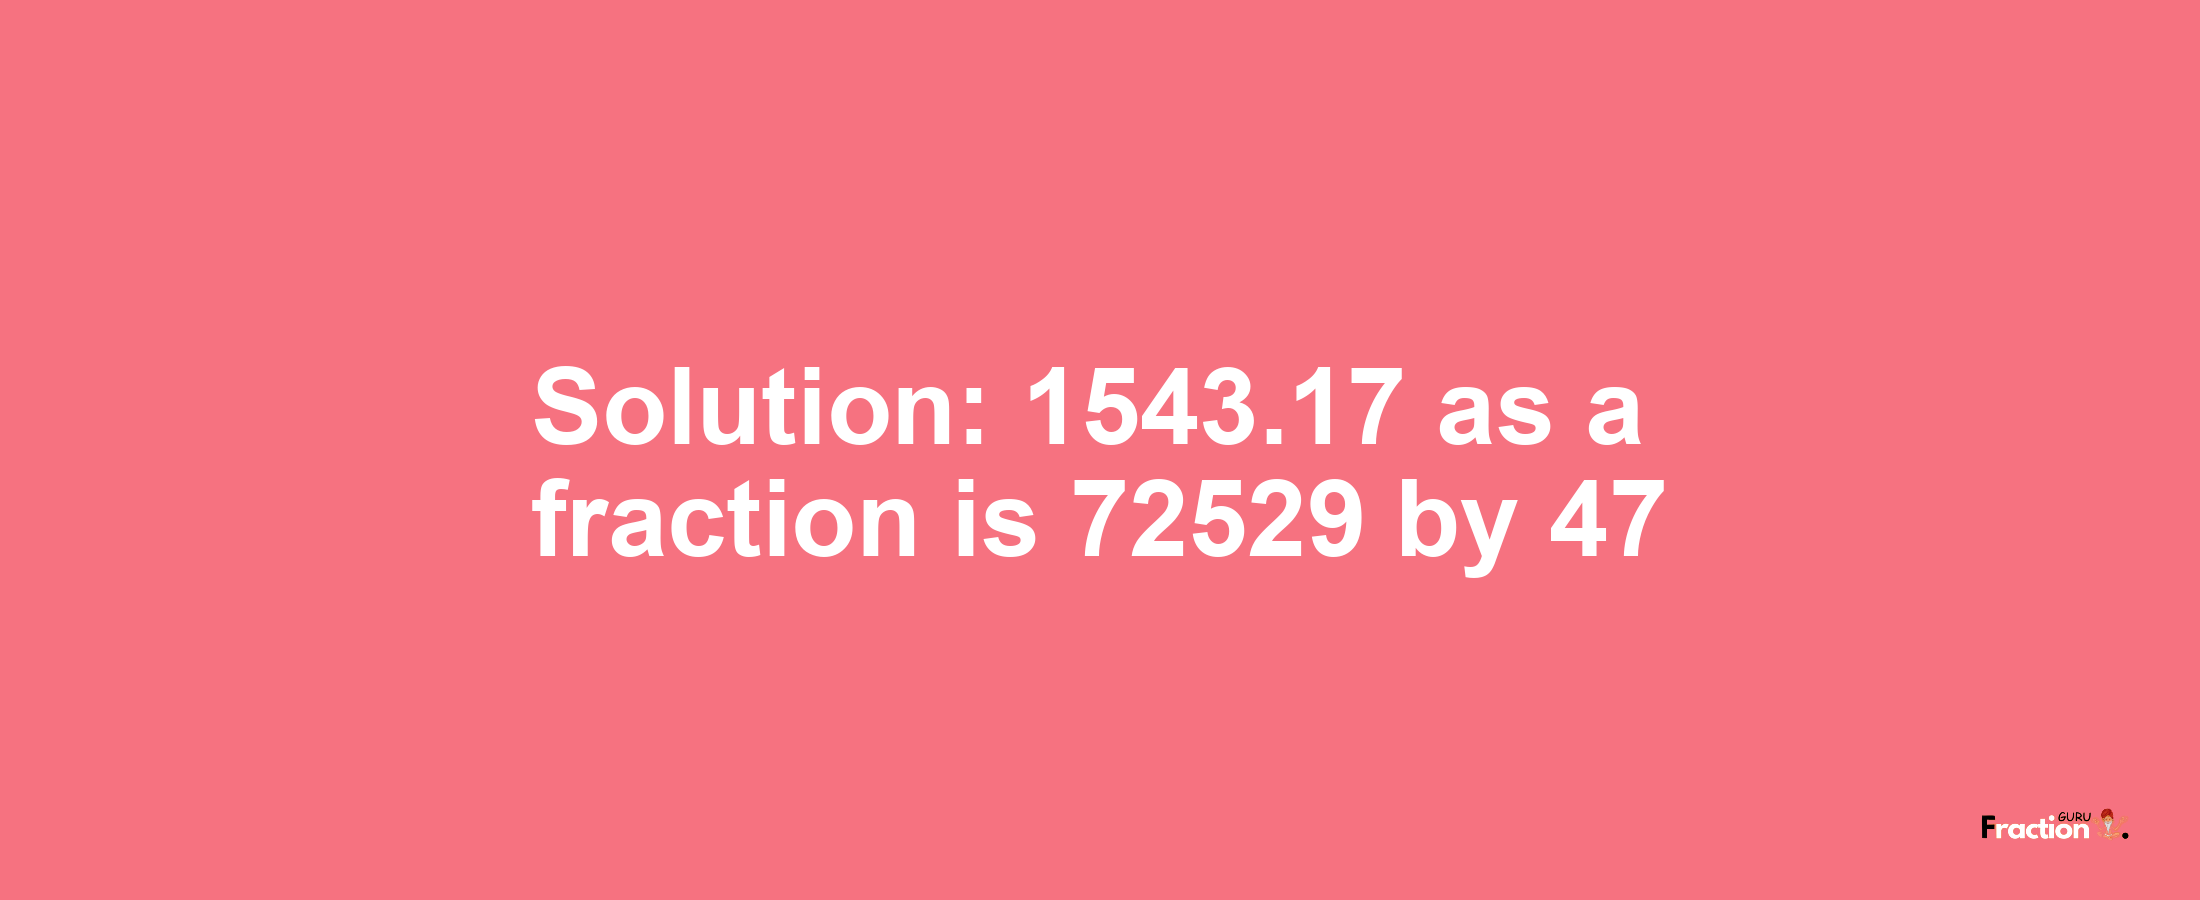 Solution:1543.17 as a fraction is 72529/47